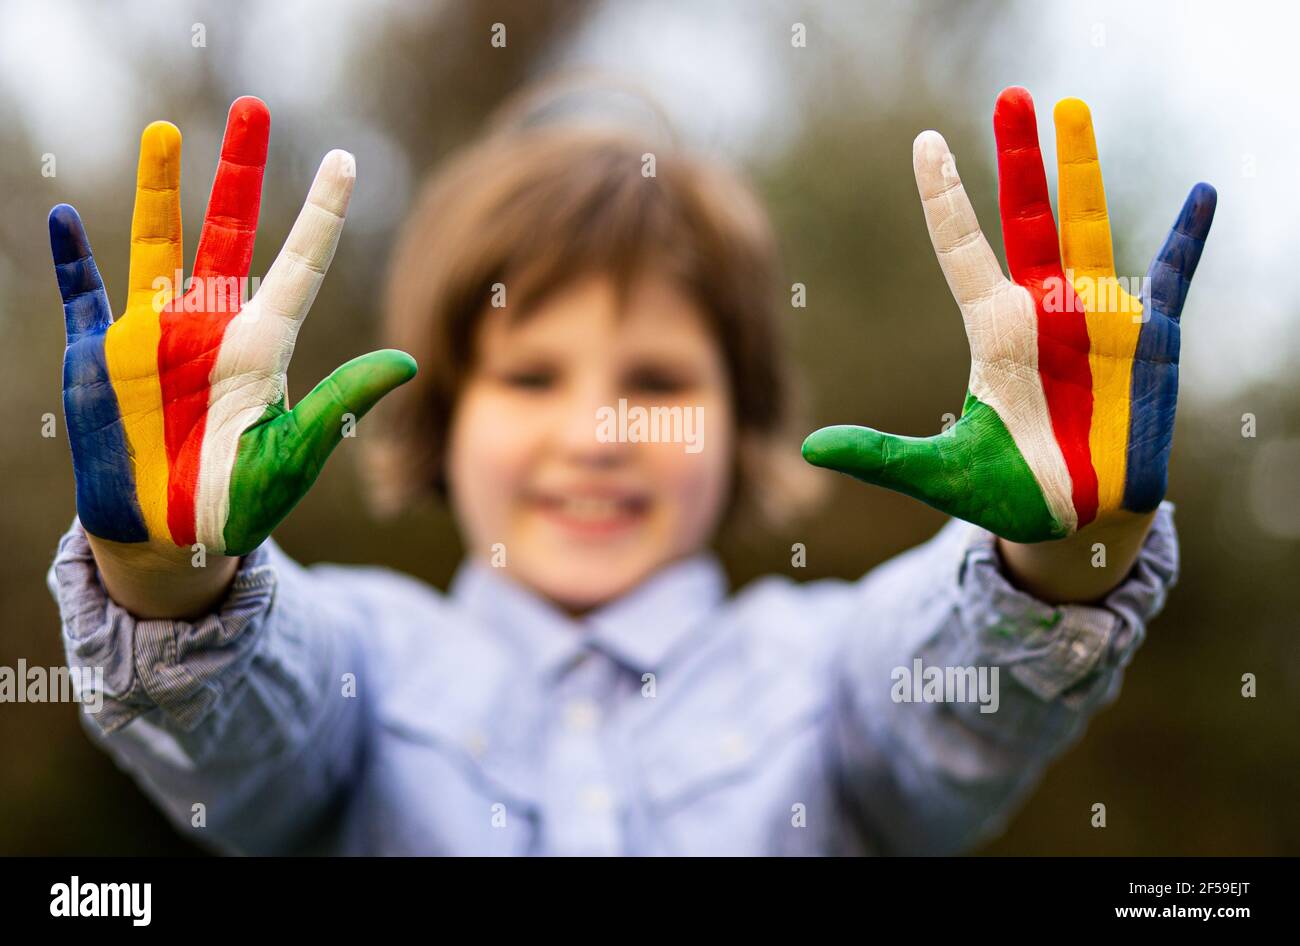 Outdoor portrait of cheerful kid girl show hello gesture with hands painted in rainbow colors. Focus on hands Stock Photo